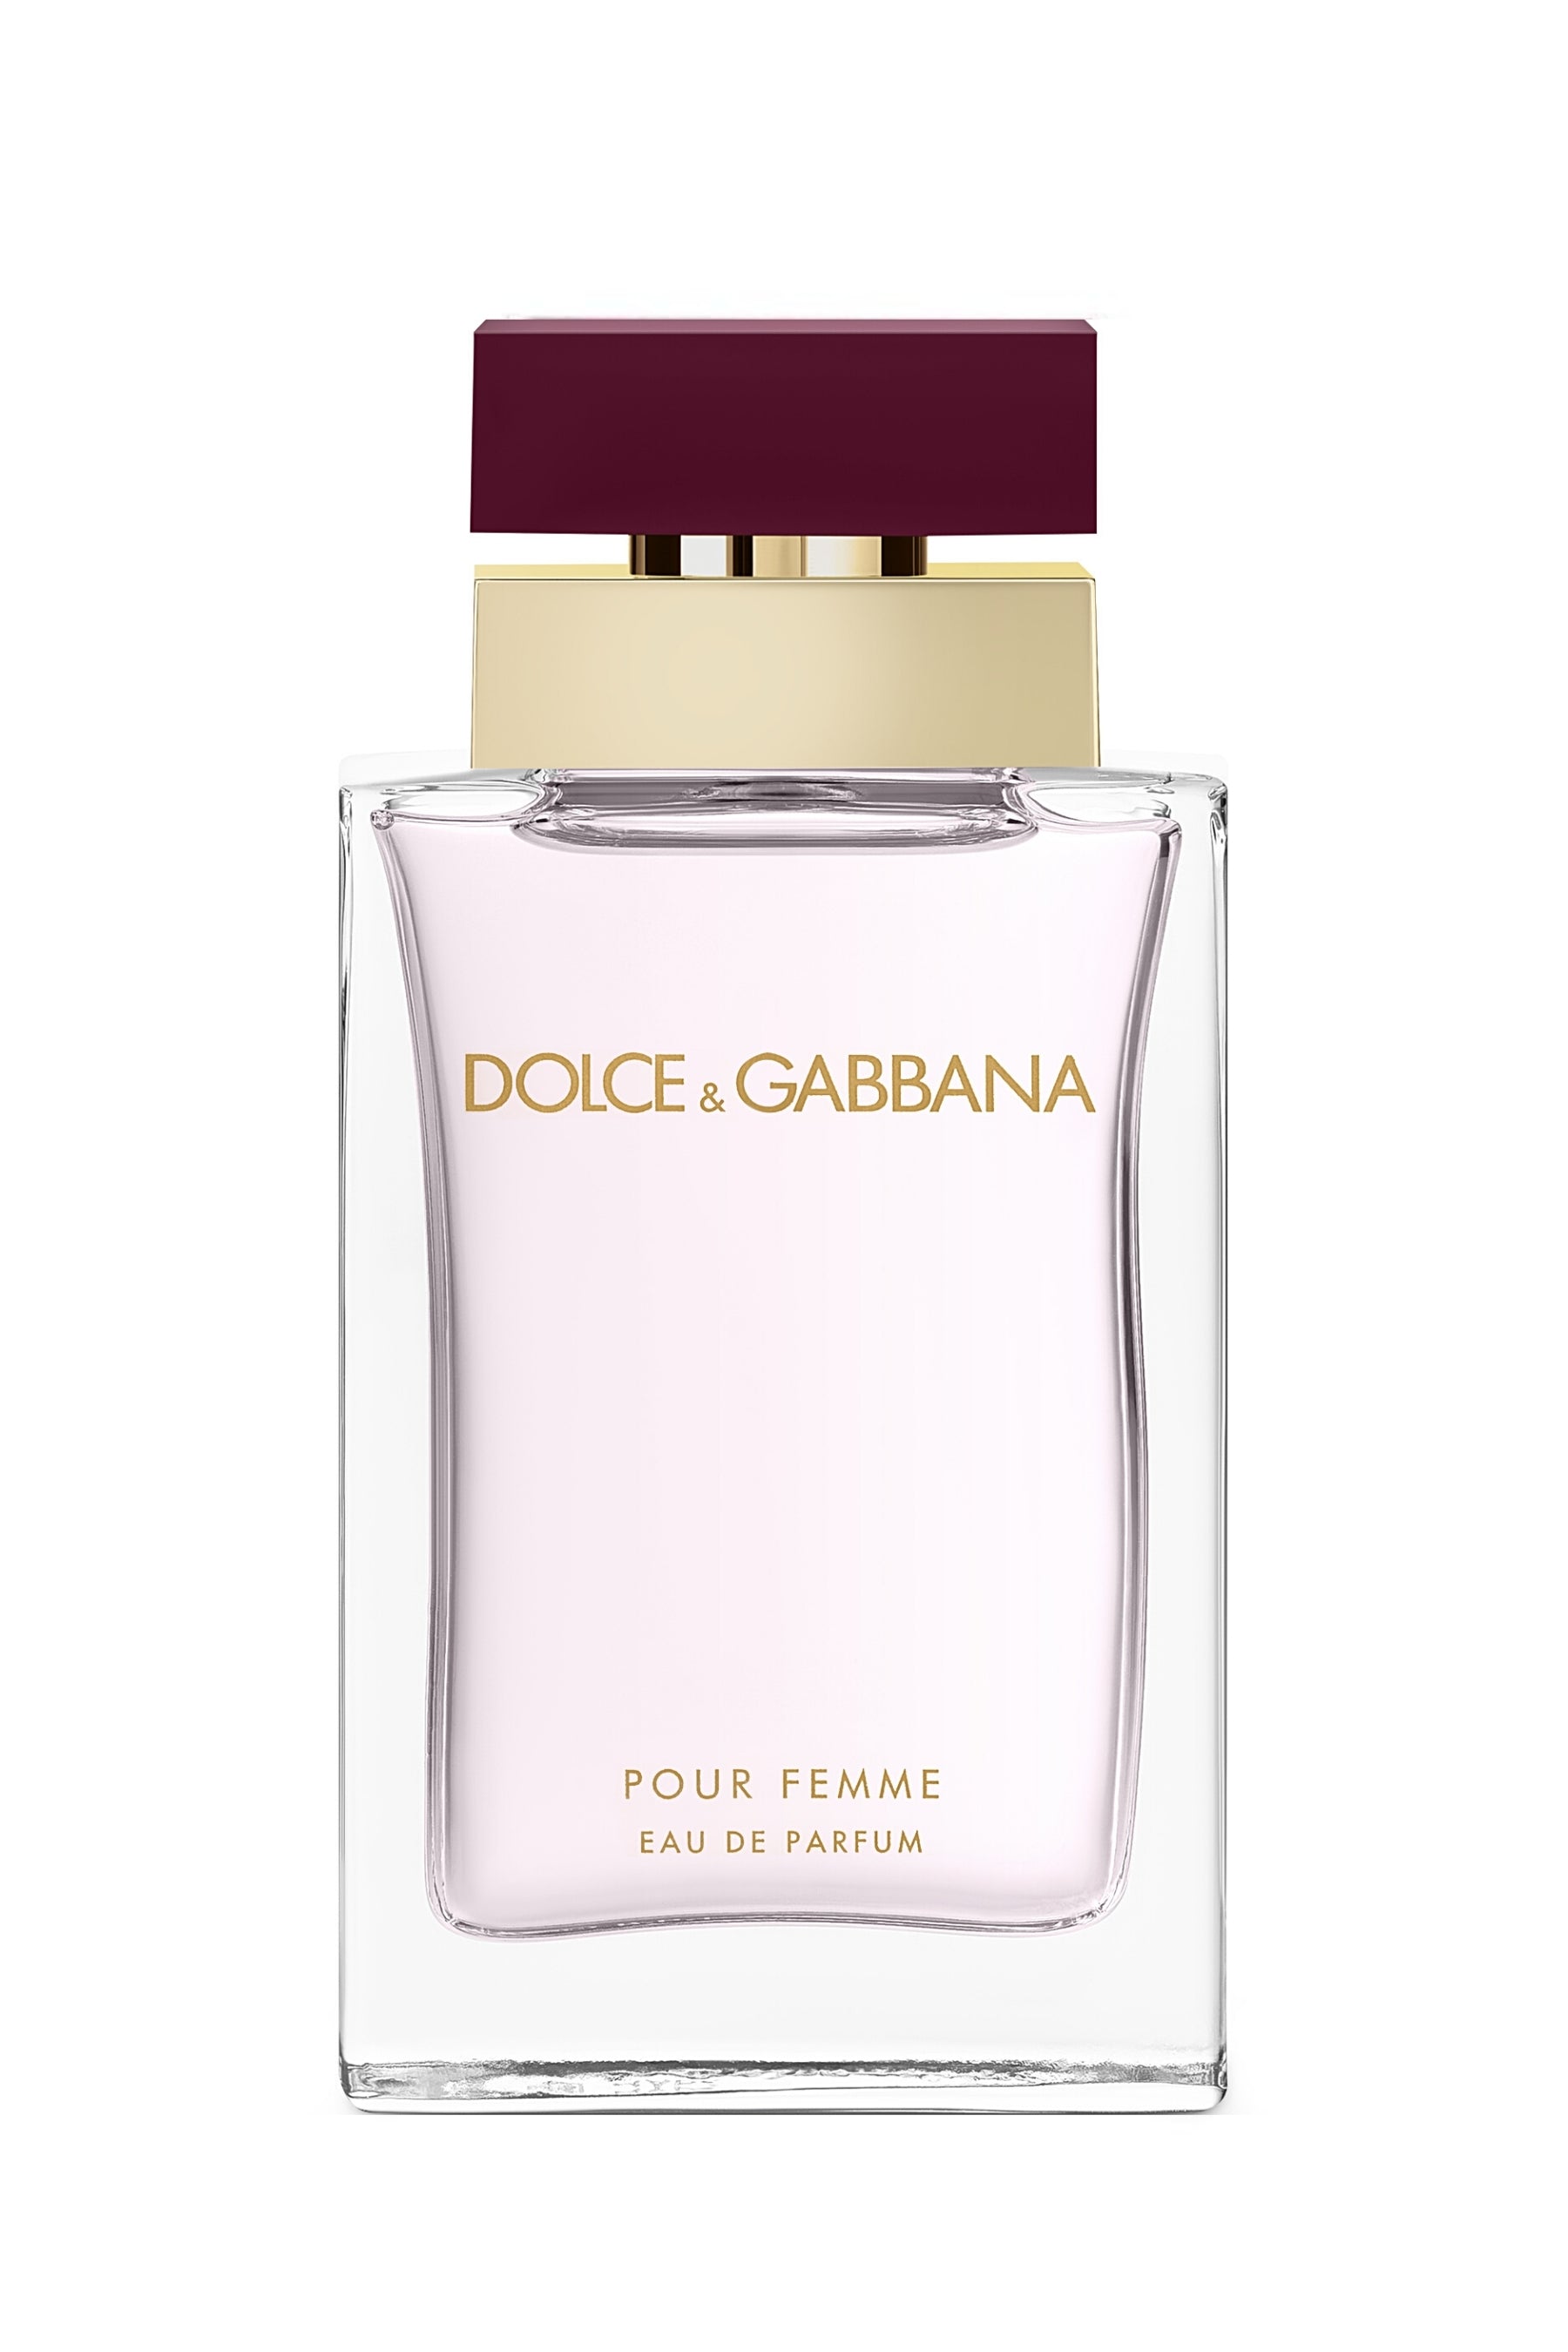 Buy Dolce and Gabbana Light Blue at Scentbird for $16.95